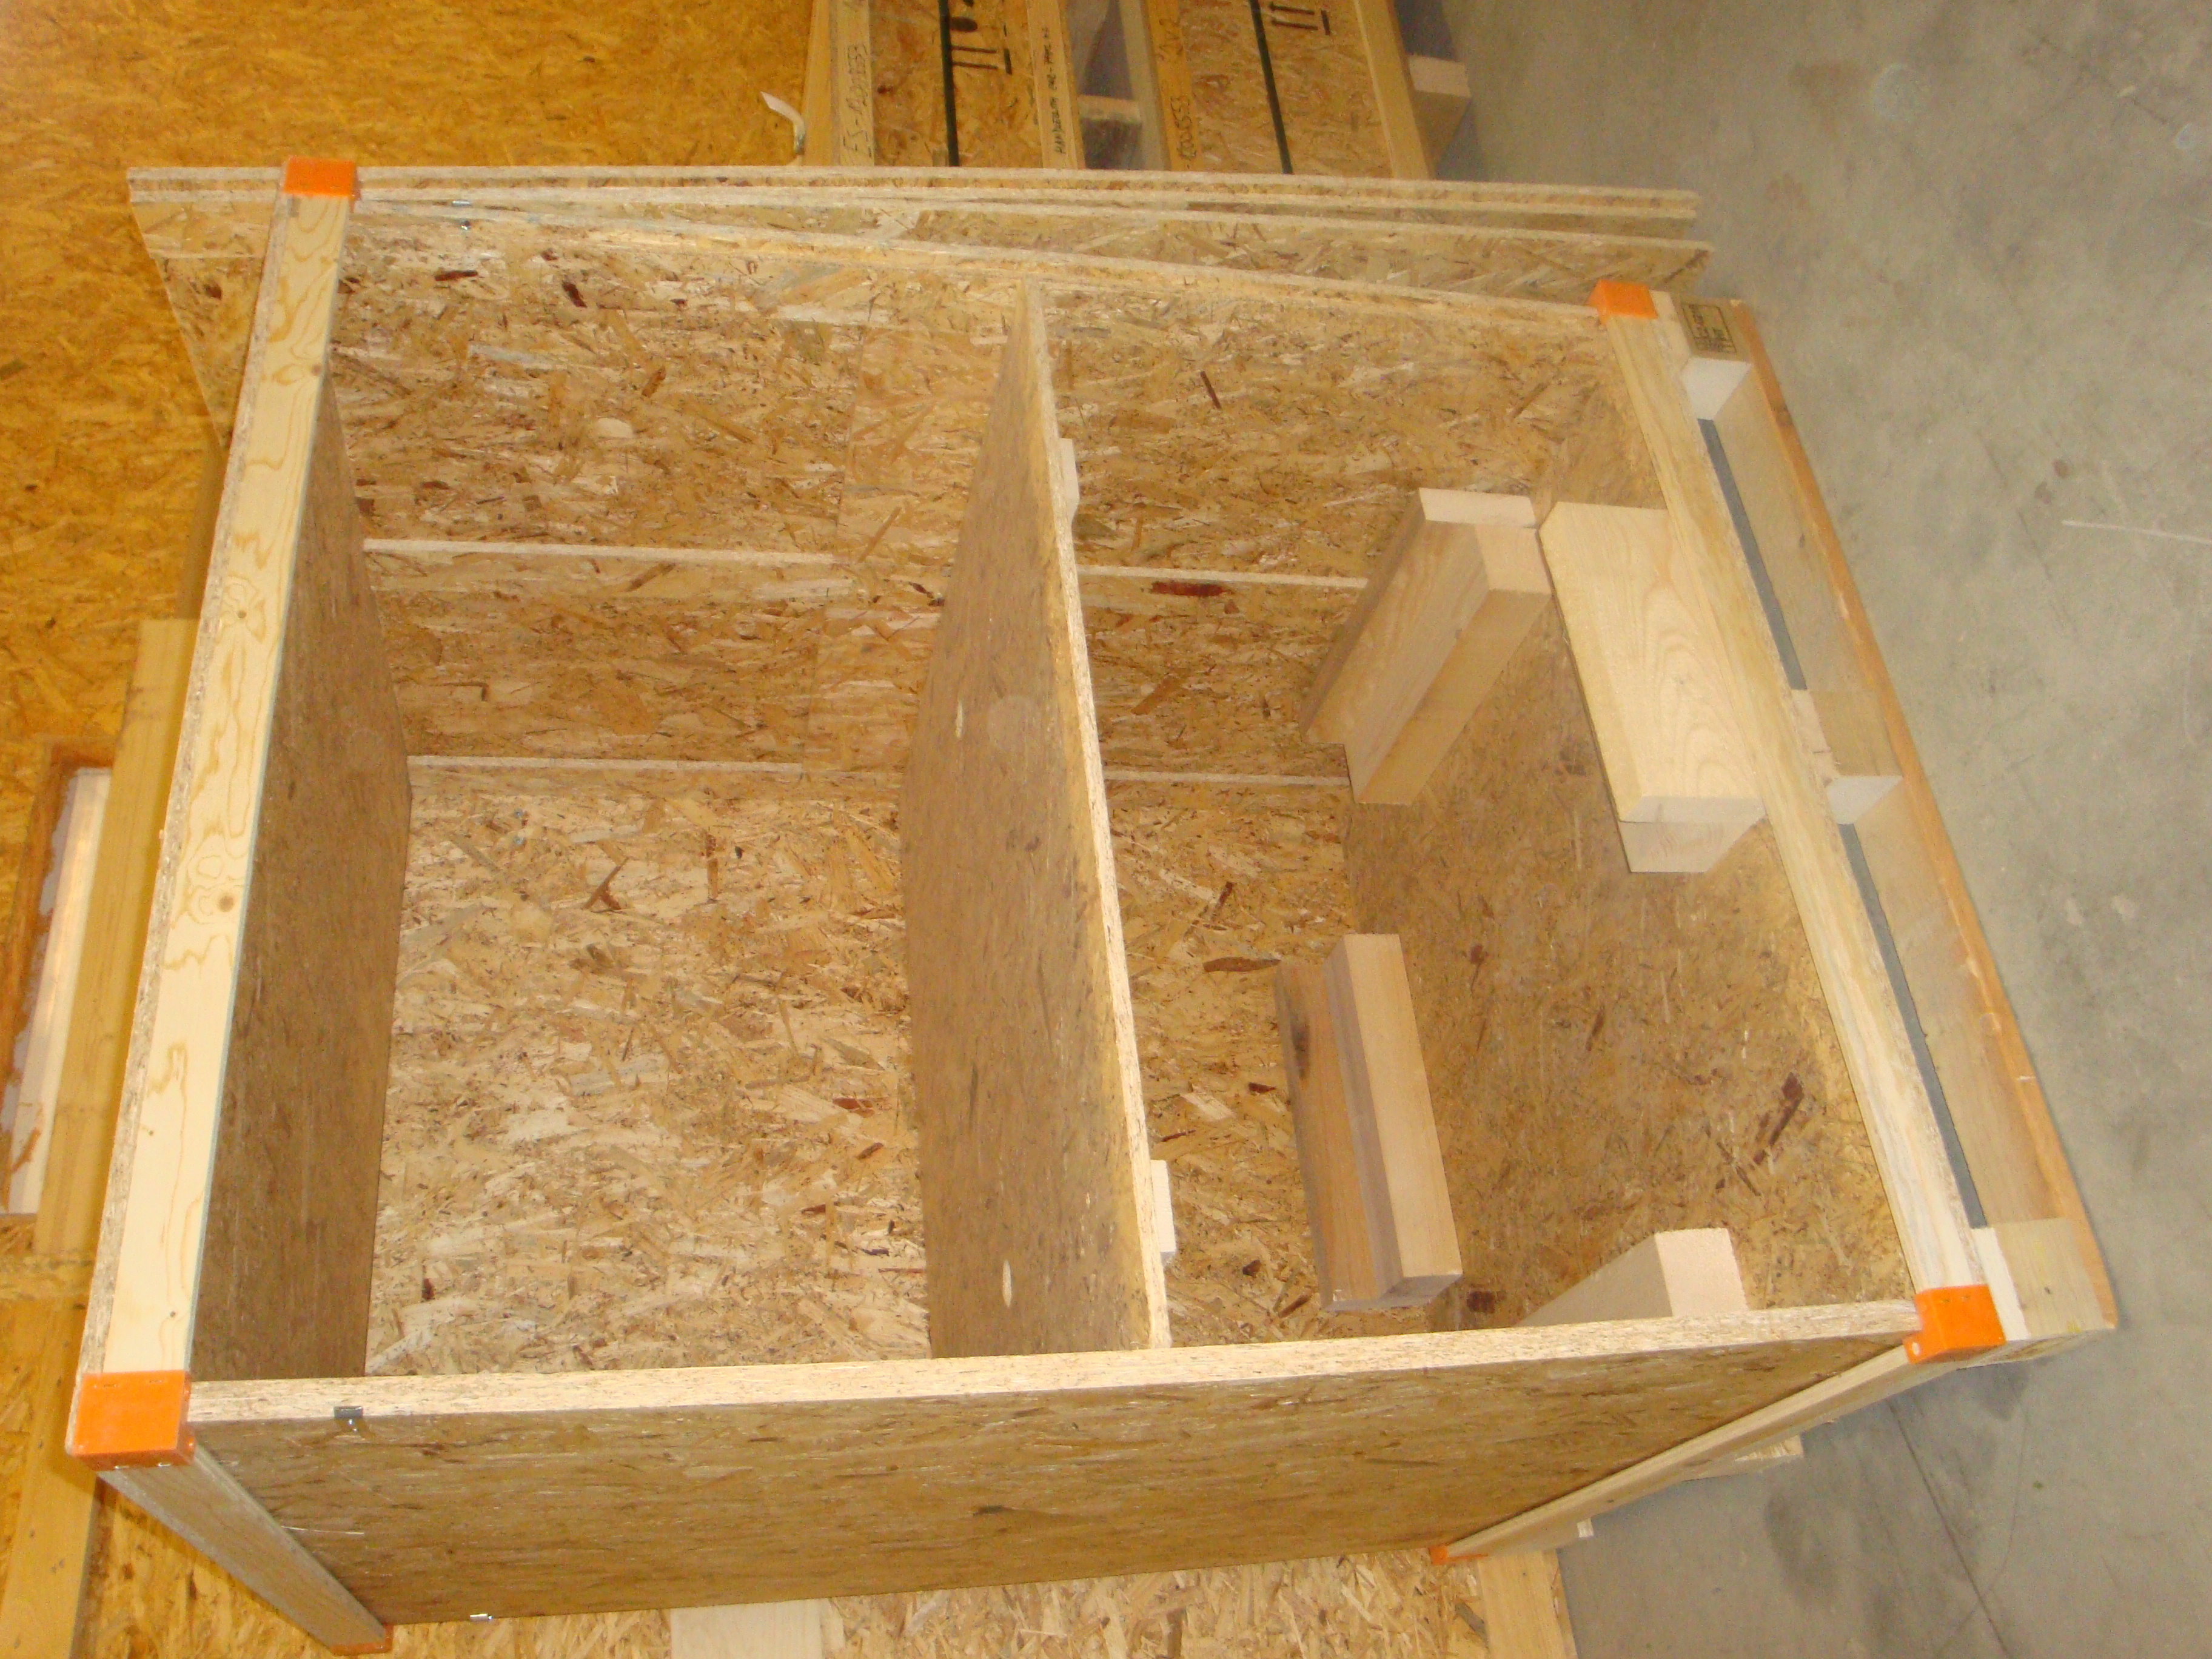 NON-WOOD crates with customer-specific inlays and intermediate shelves